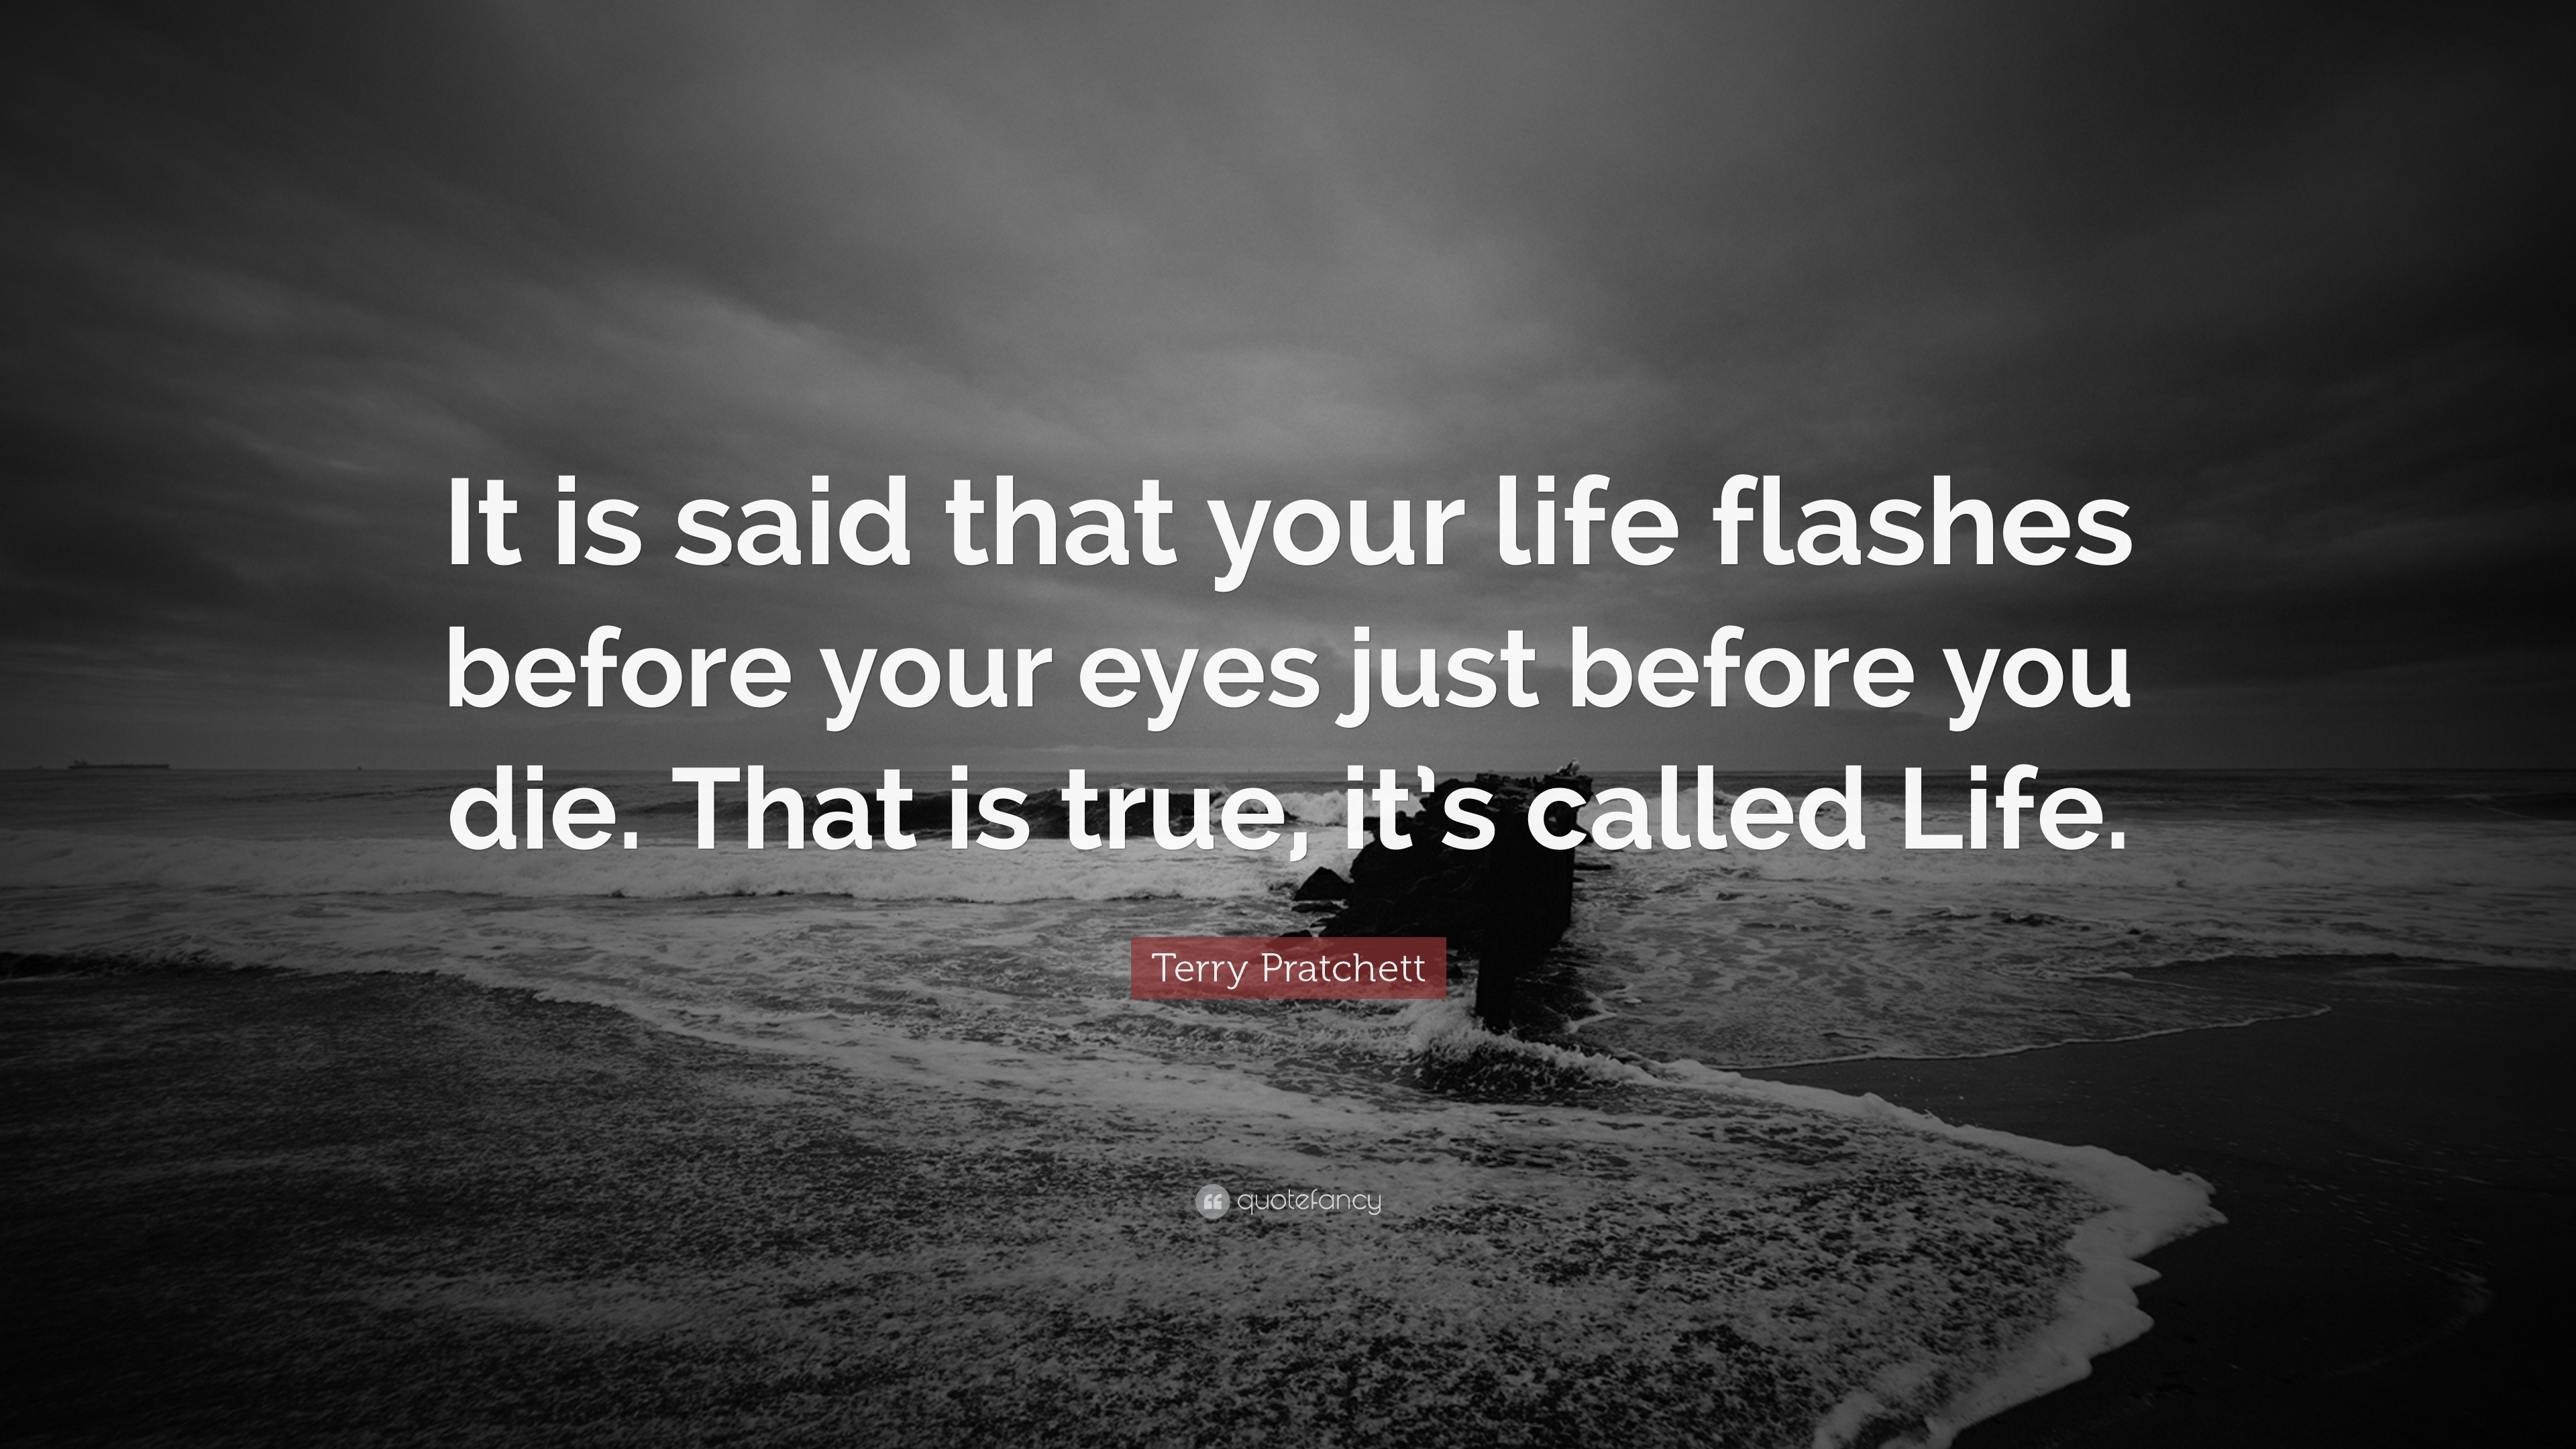 flashes before your eyes lost